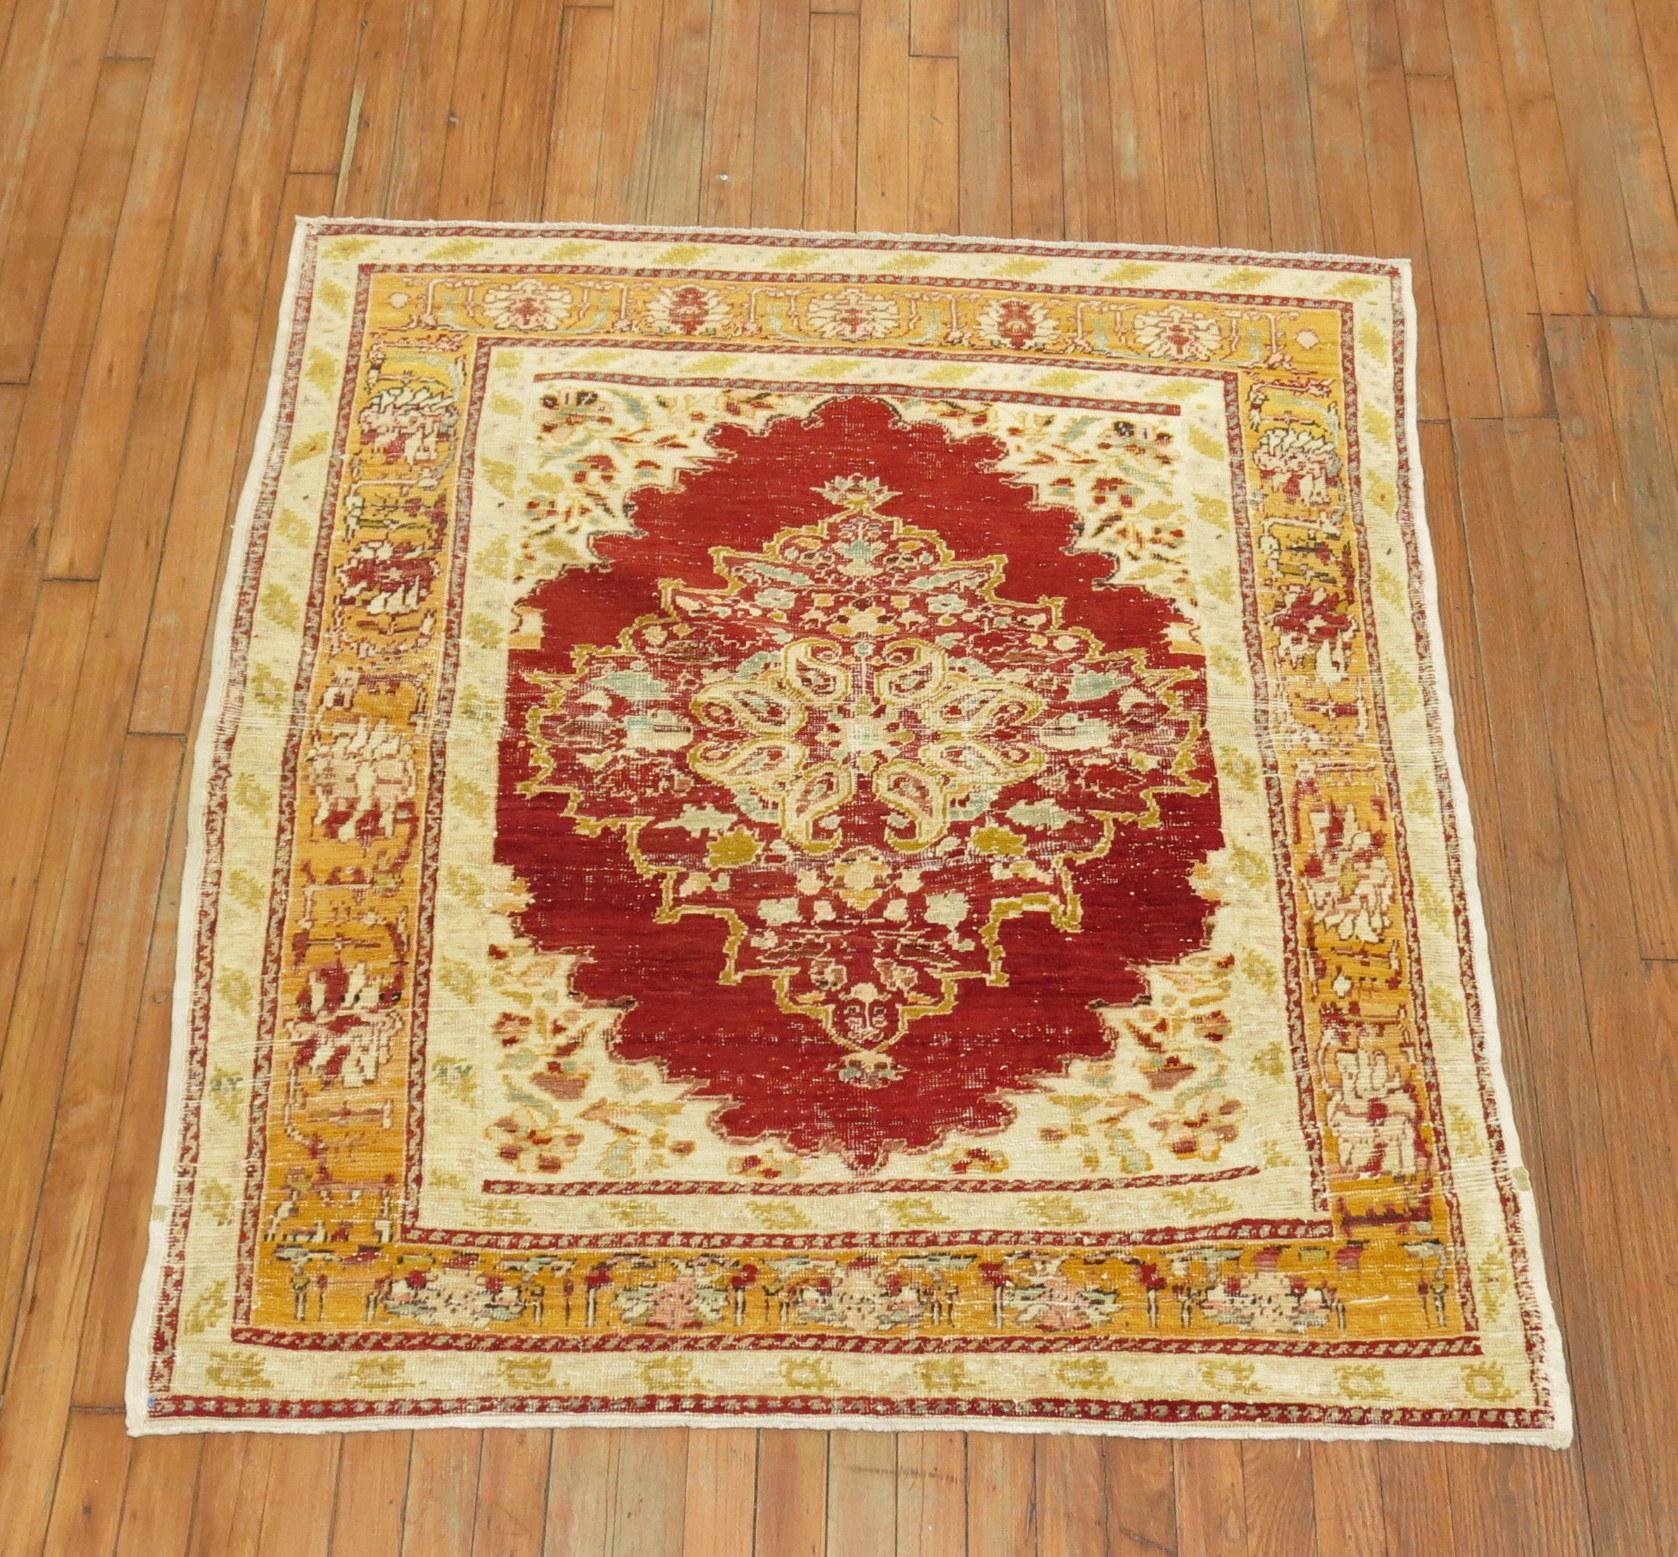 A square shaped finely woven antique Turkish sivas small rug.